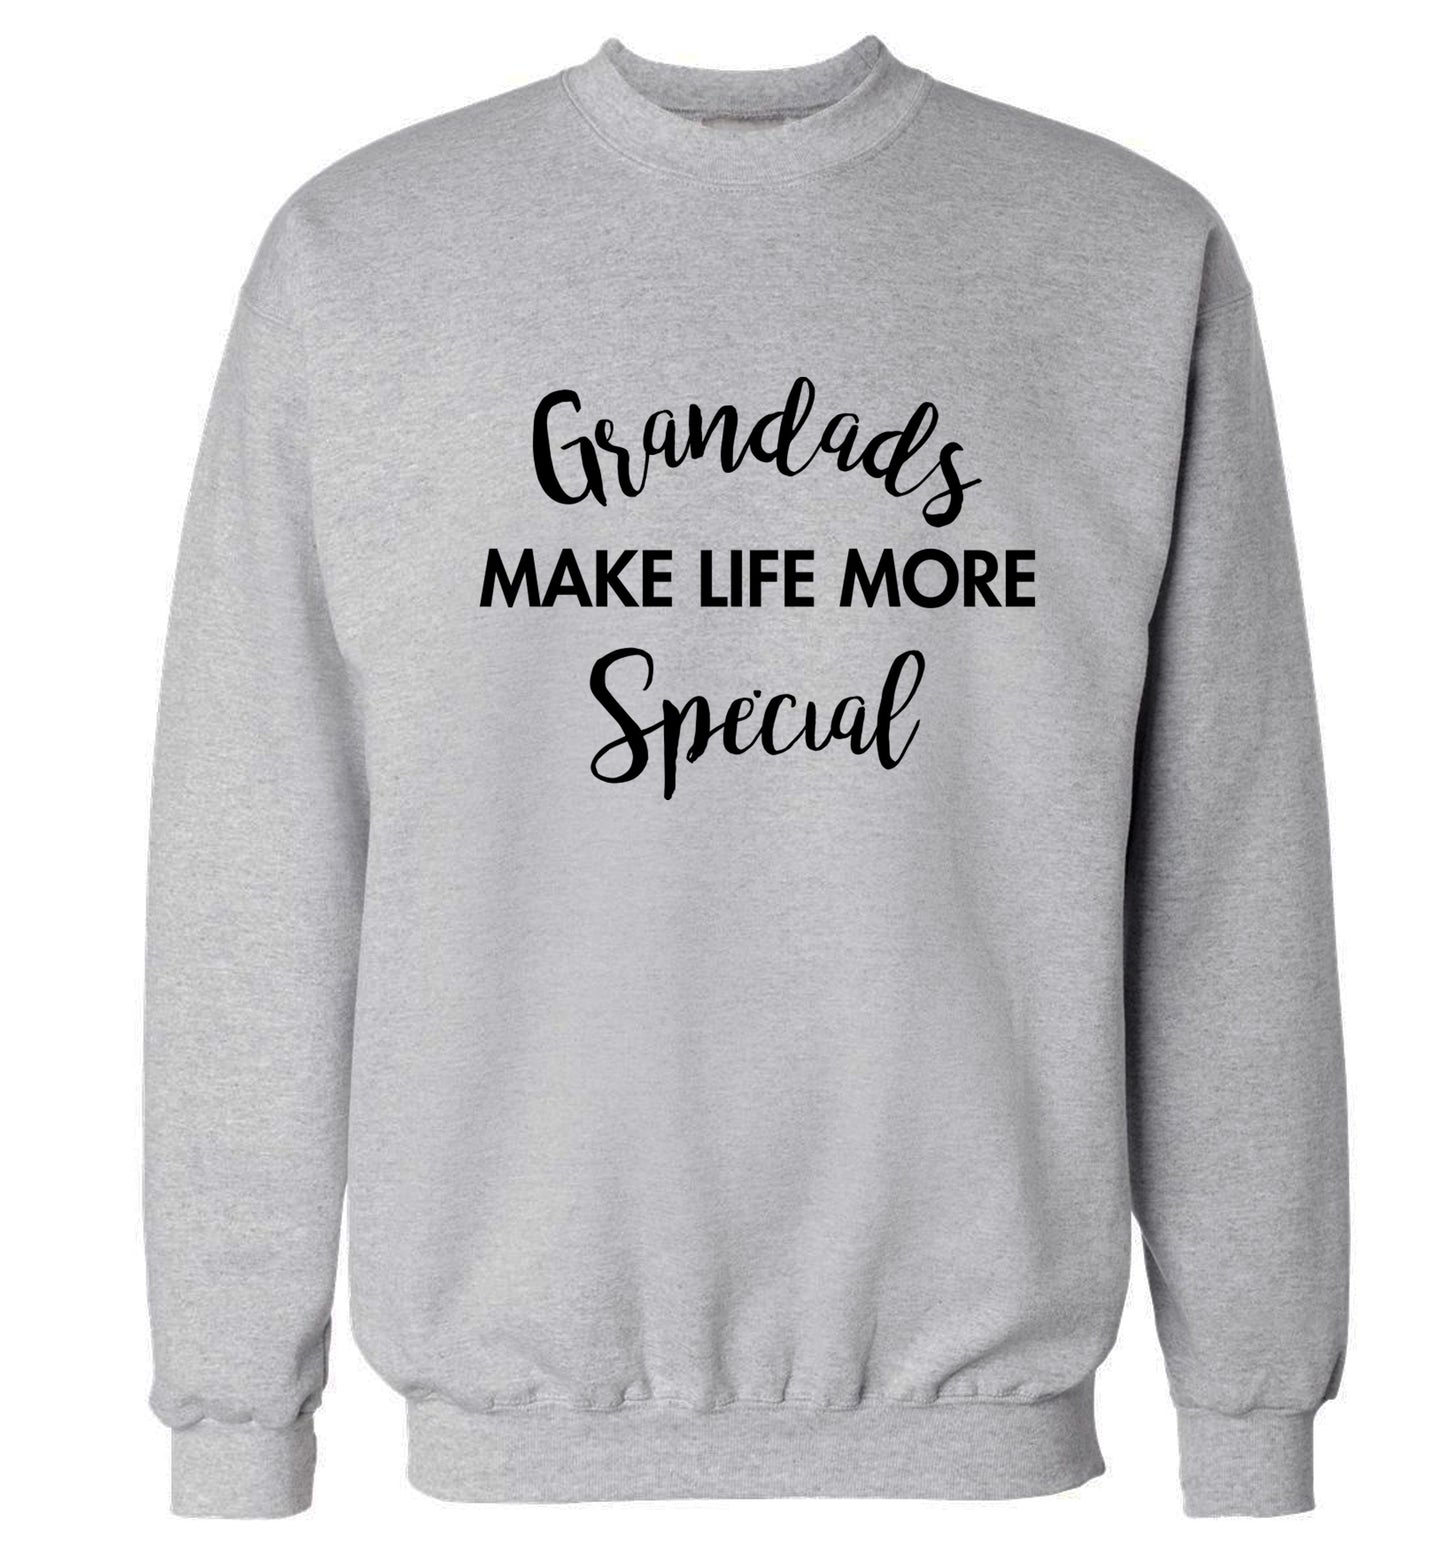 Grandads make life more special Adult's unisex grey Sweater 2XL